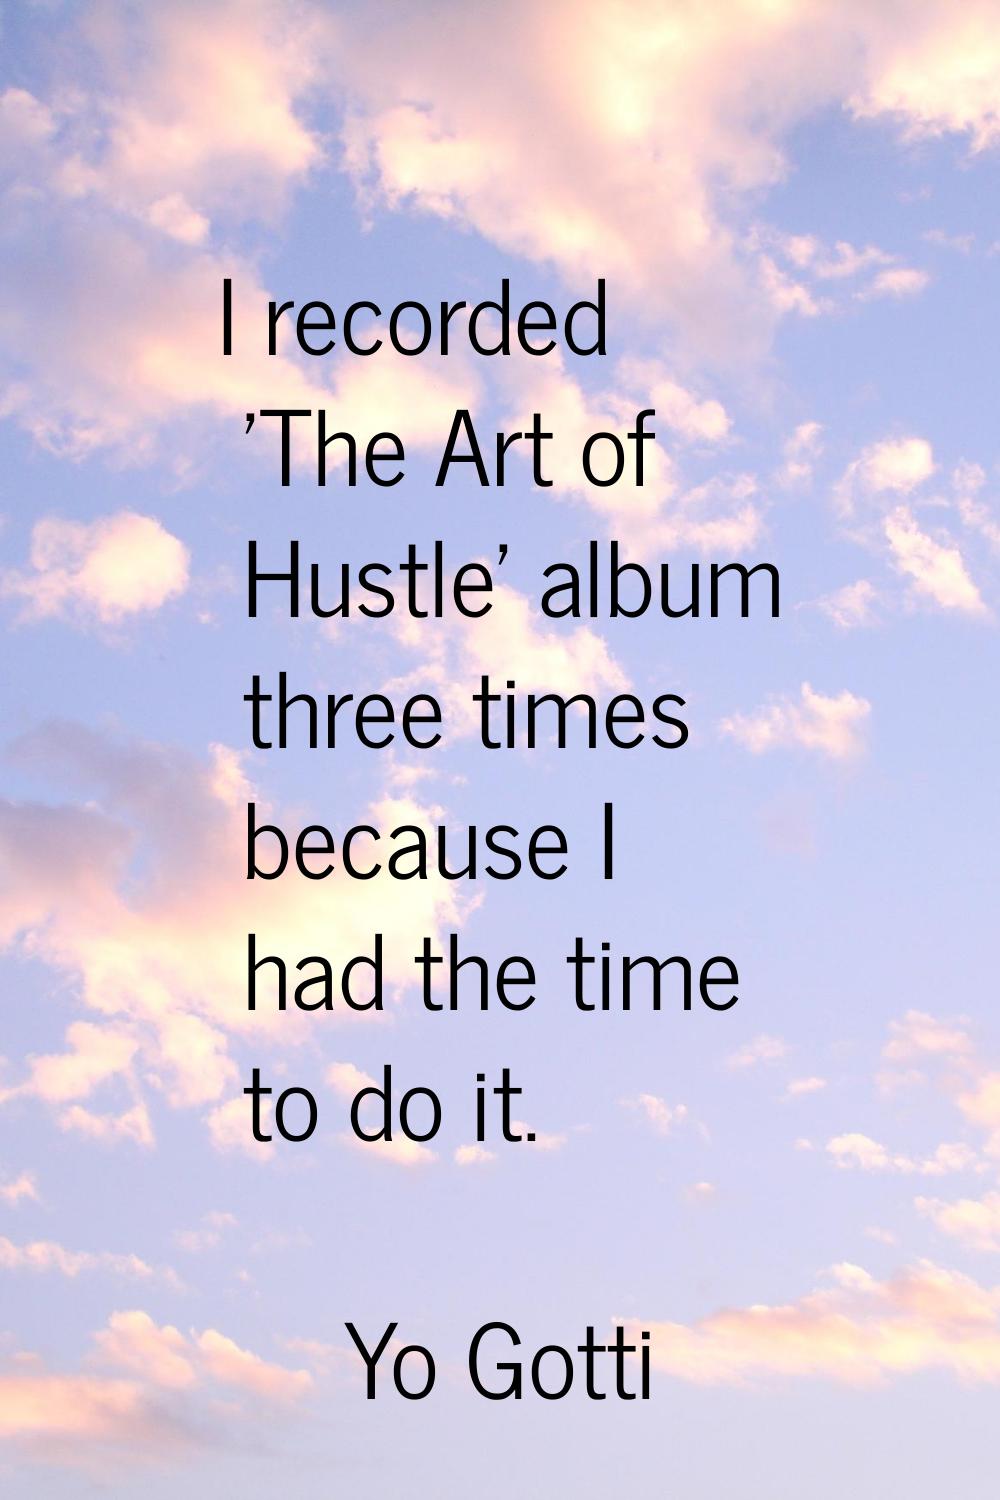 I recorded 'The Art of Hustle' album three times because I had the time to do it.